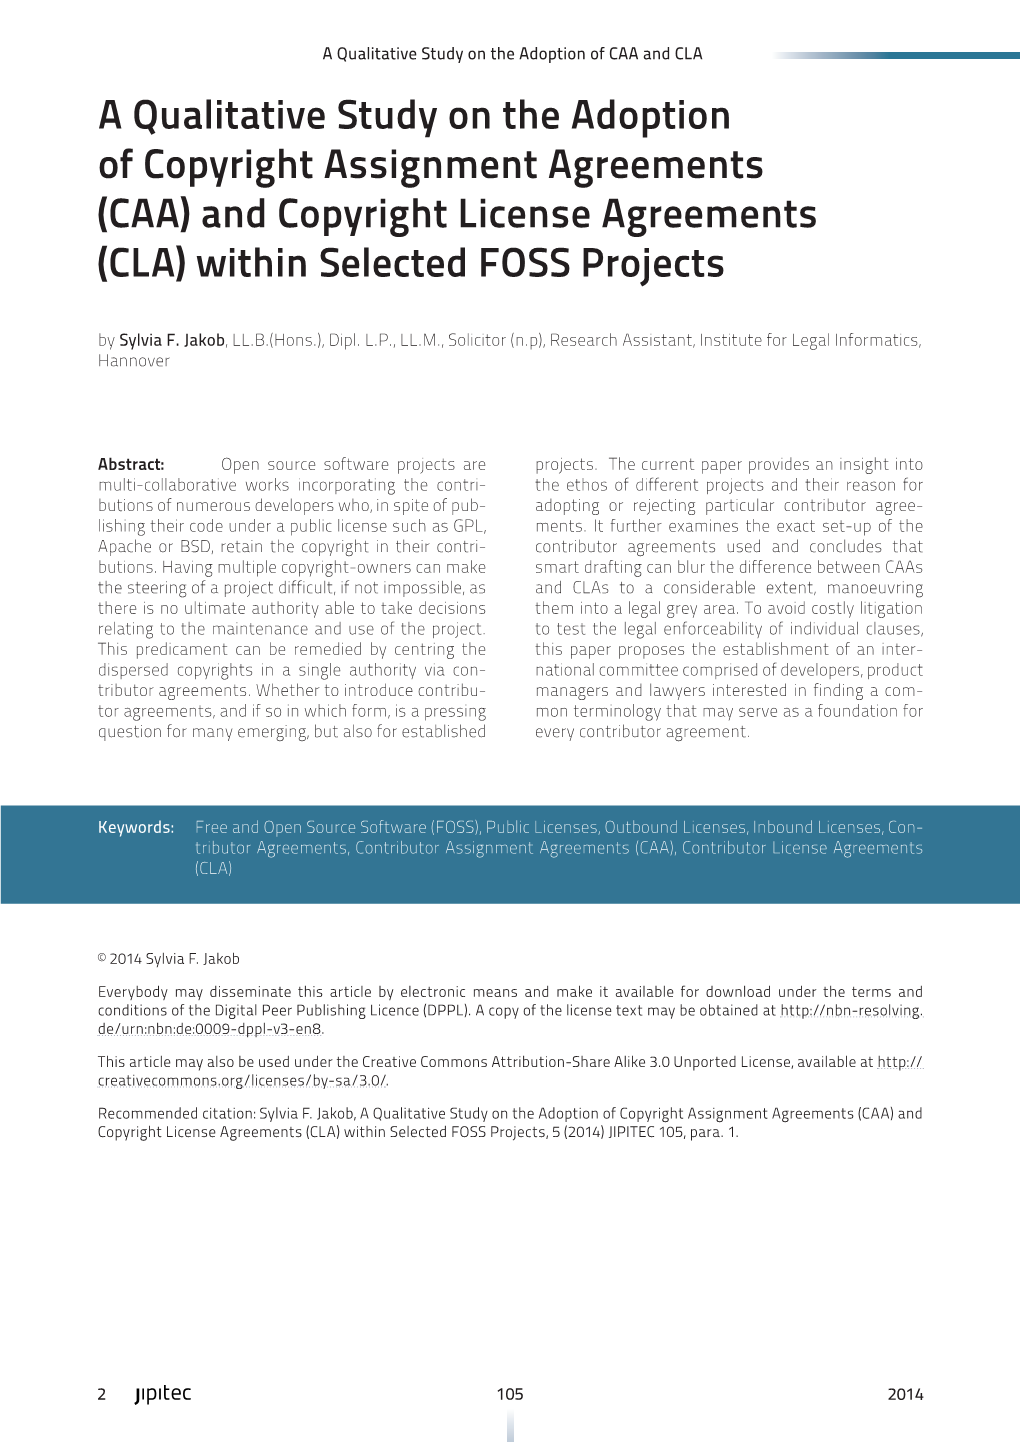 A Qualitative Study on the Adoption of Copyright Assignment Agreements (CAA) and Copyright License Agreements (CLA) Within Selected FOSS Projects by Sylvia F